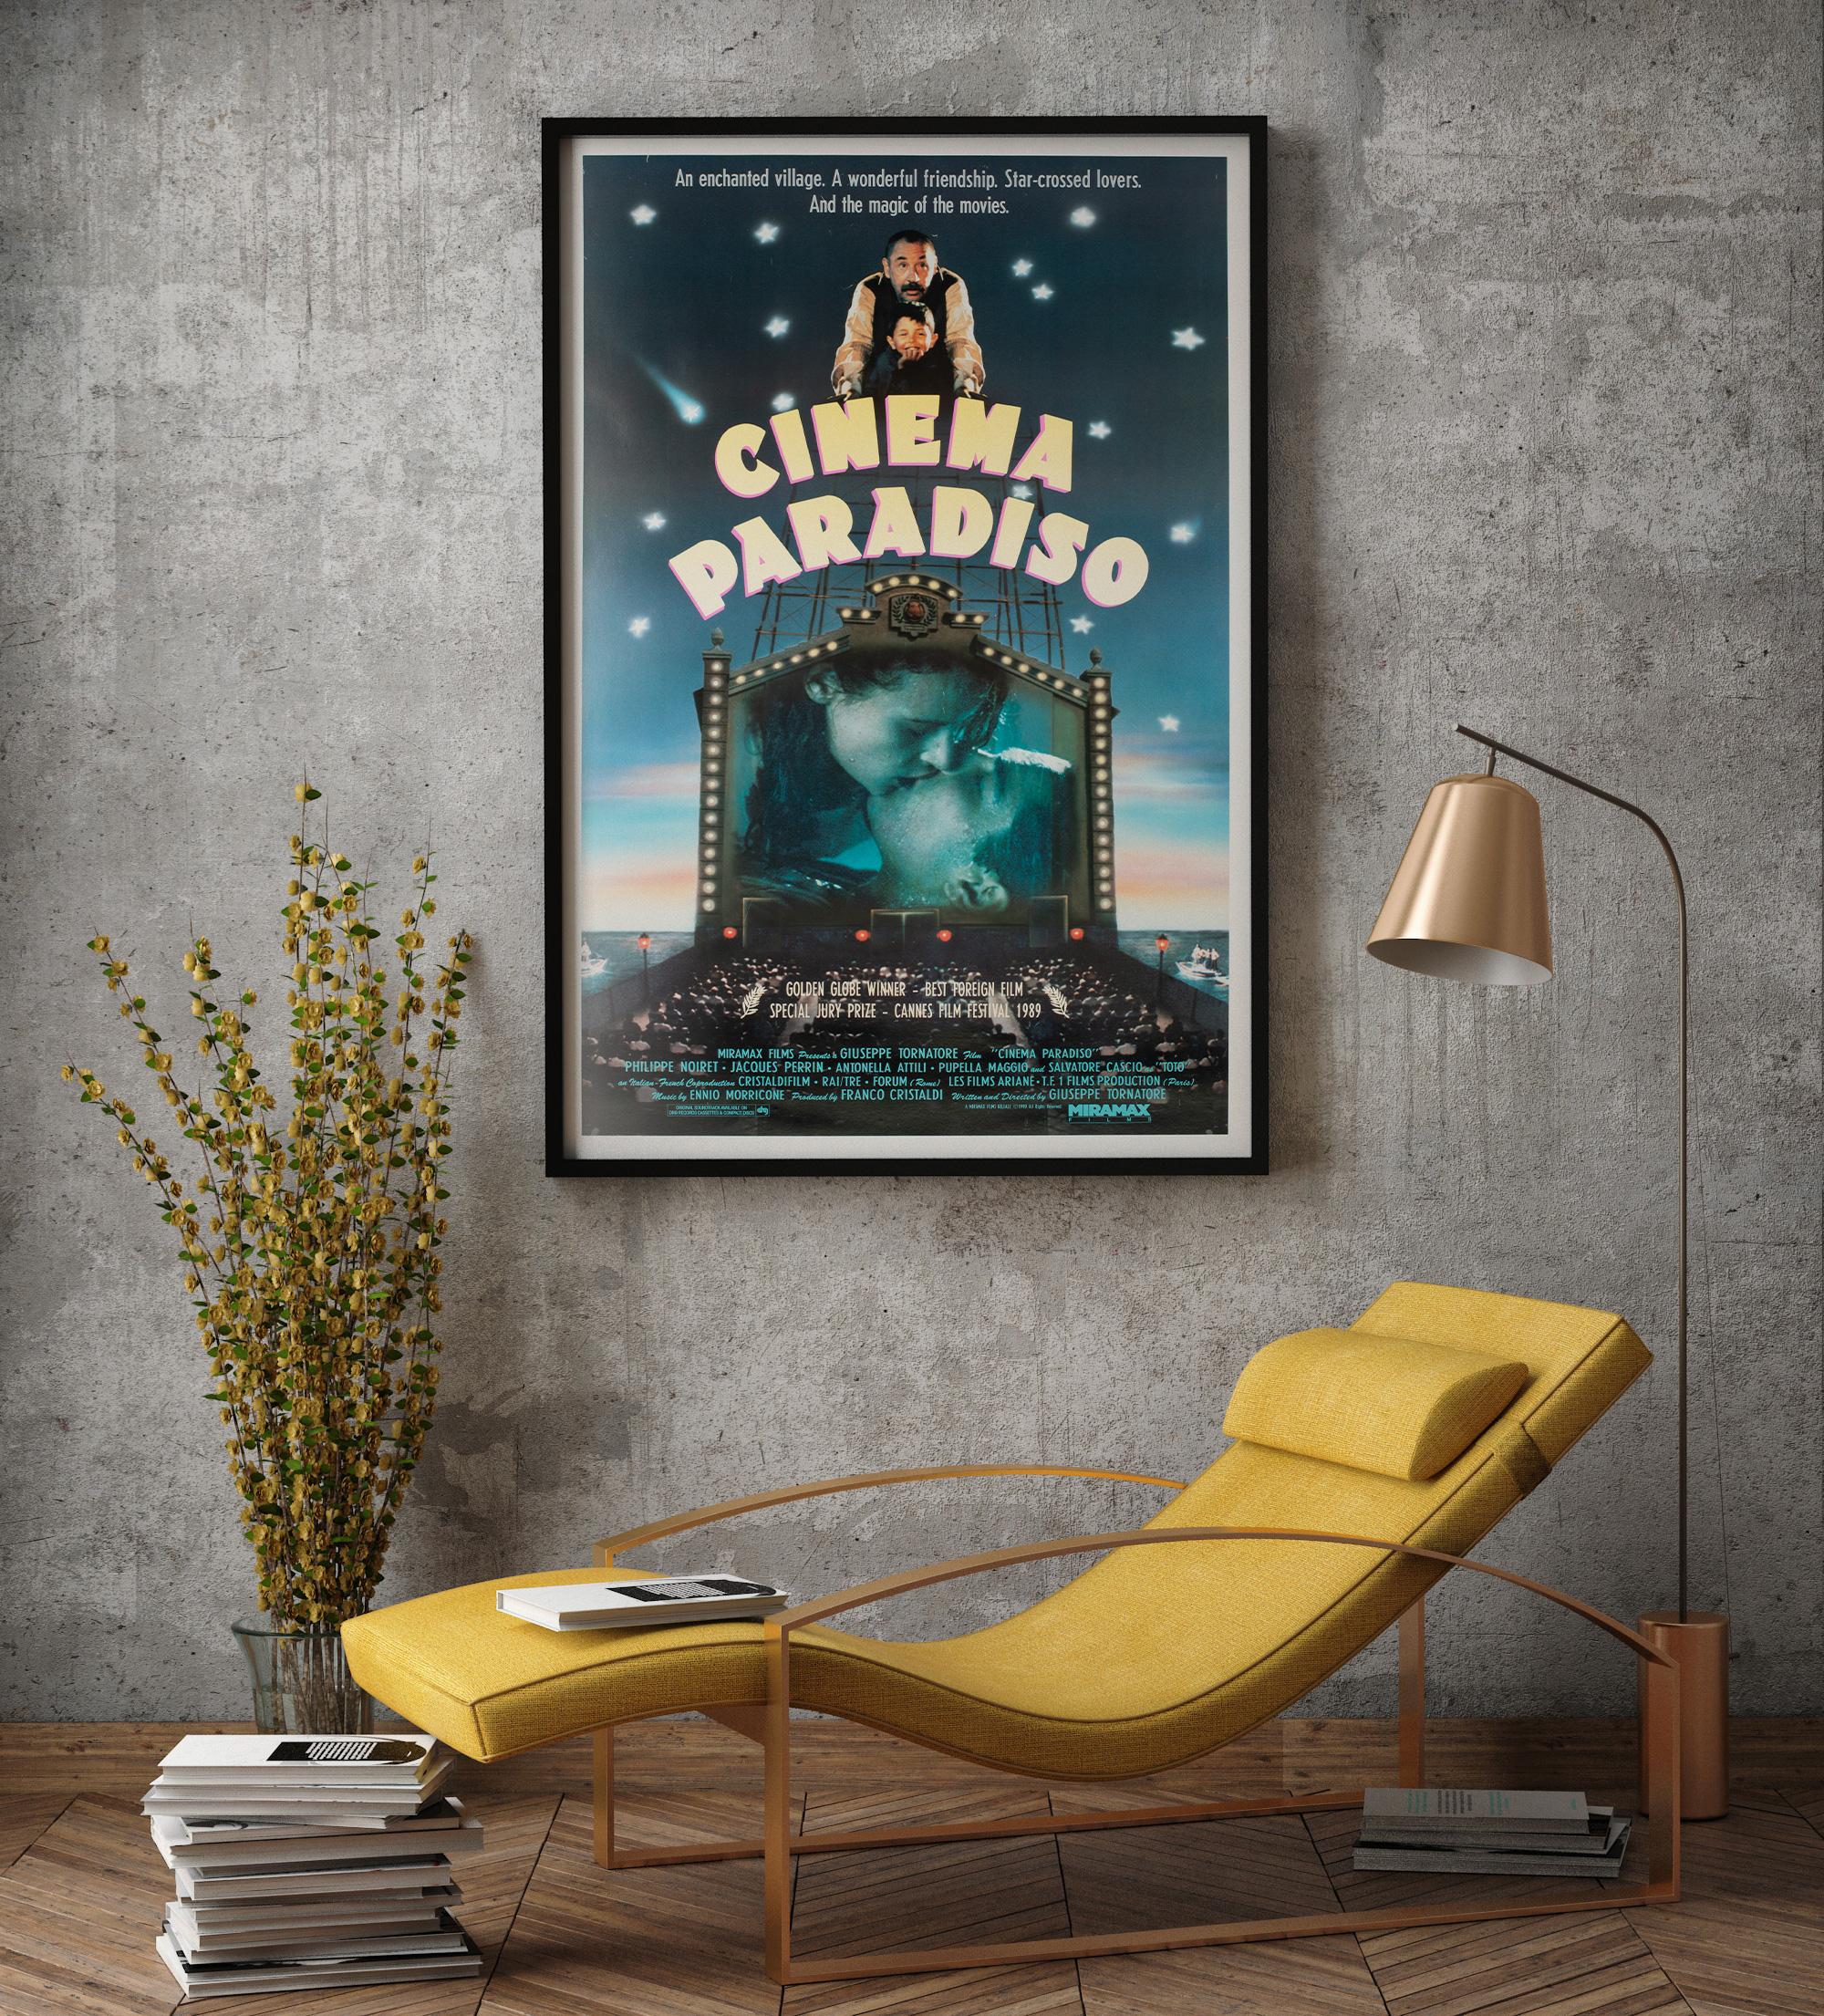 The smashing US poster for Tornatore's modern classic Cinema Paradiso.

This vintage movie poster has been professionally linen-backed in the European style (without any restoration) and is sized 27 1/2 x 40 1/2 inches (40 x 43 inches including